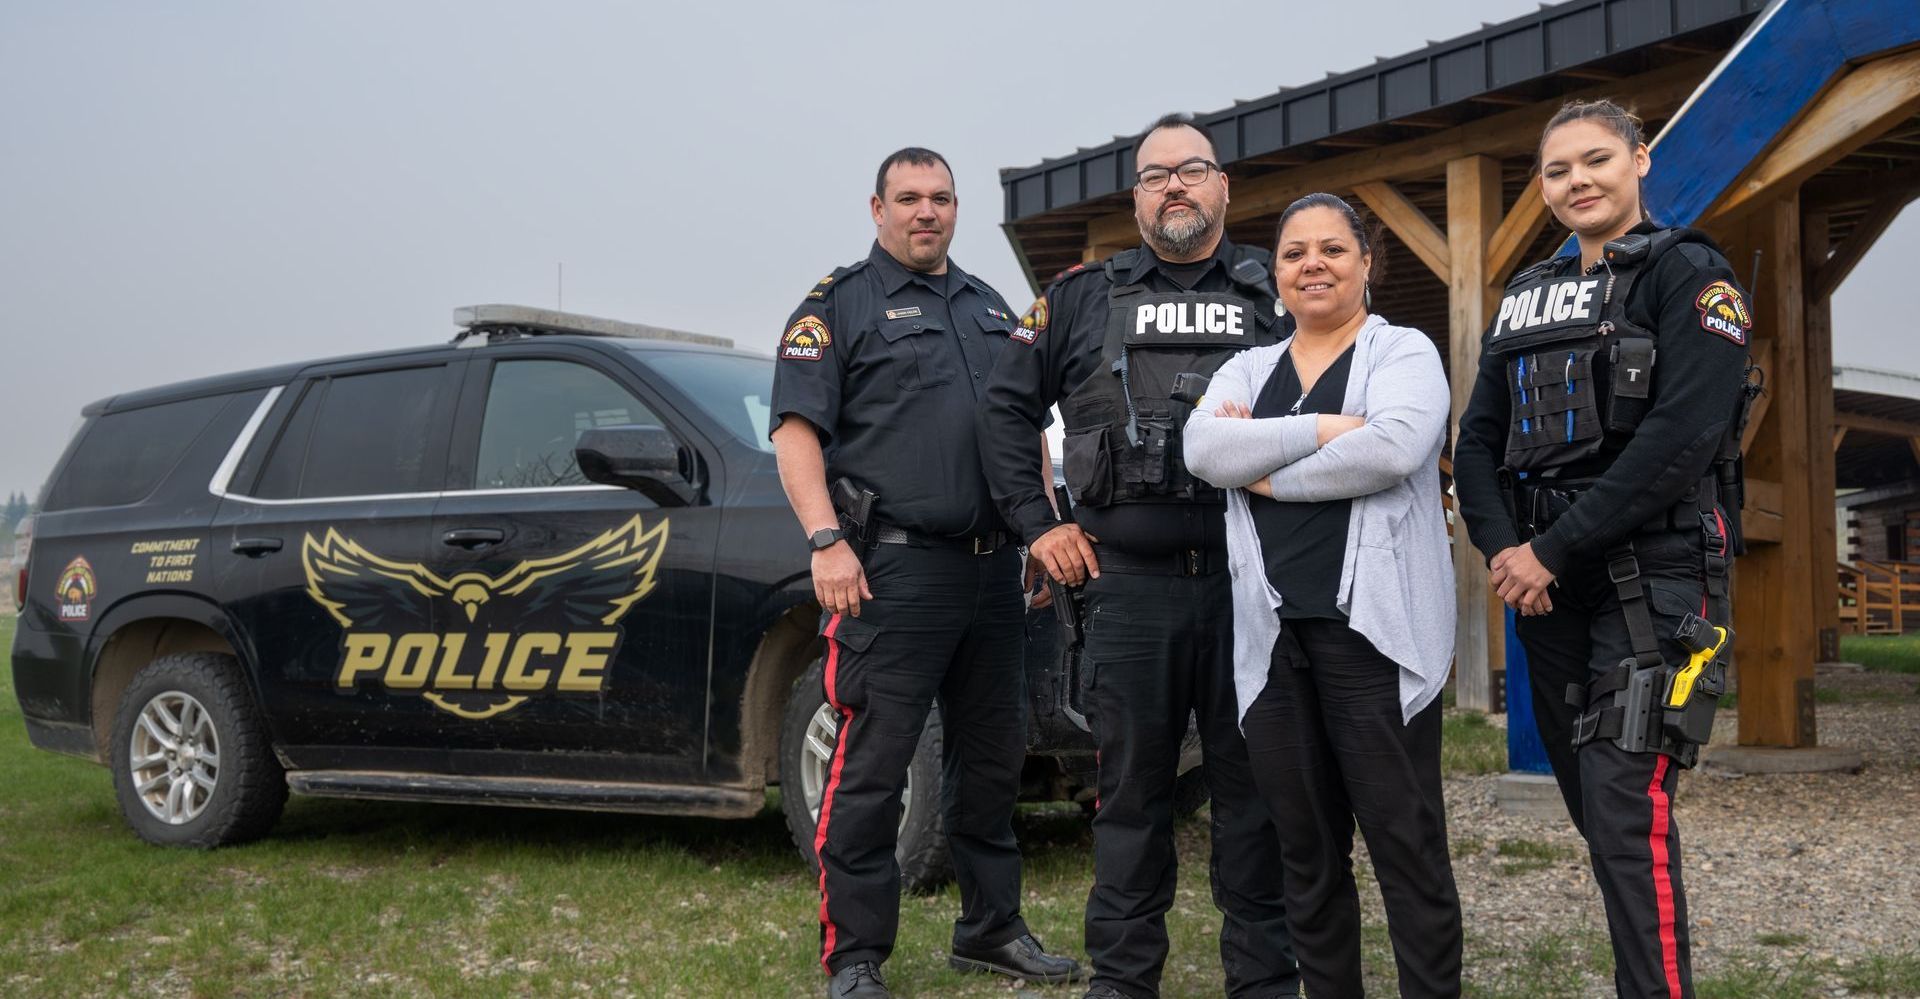 MFNPS-Manitoba First Nations Police Service - We proudly Serve